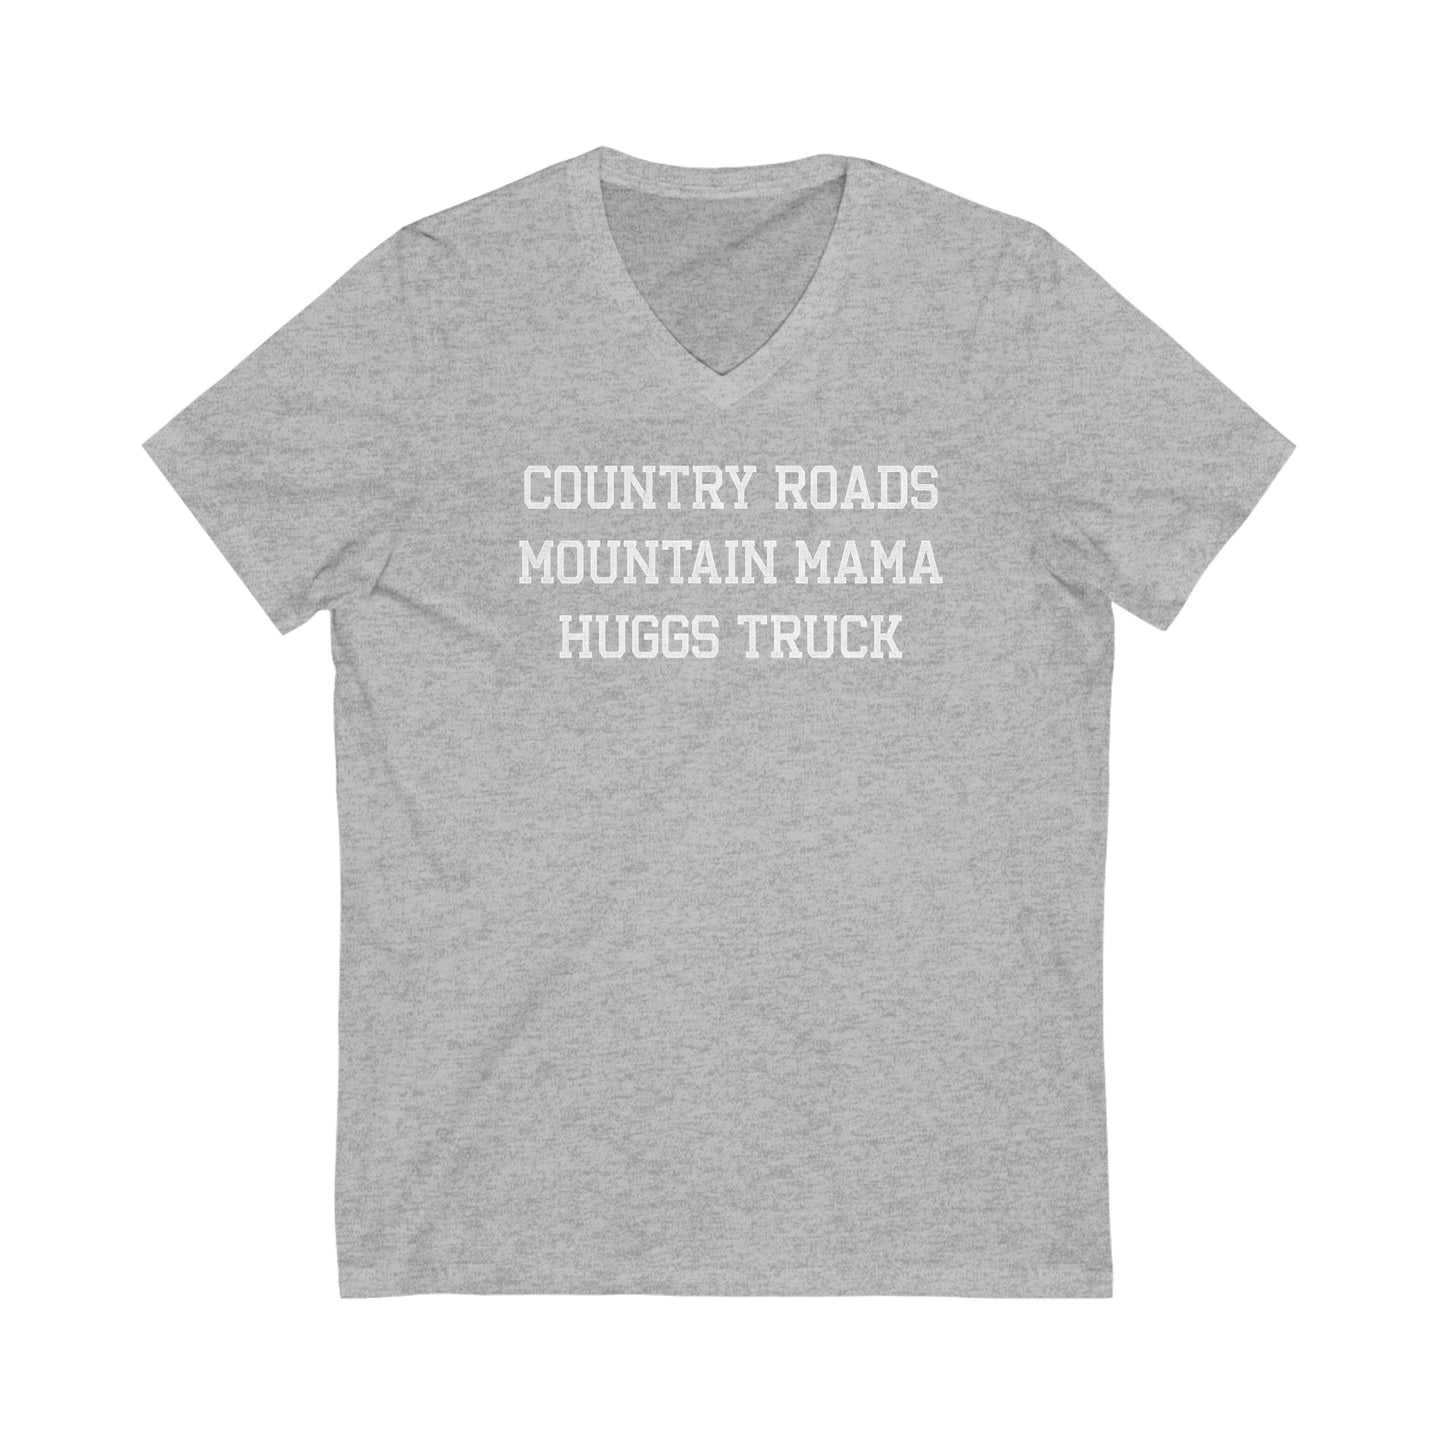 COUNTRY ROADS_MOUNTAIN MAMA_HUGGS TRUCK-Unisex Jersey Short Sleeve V-Neck Tee